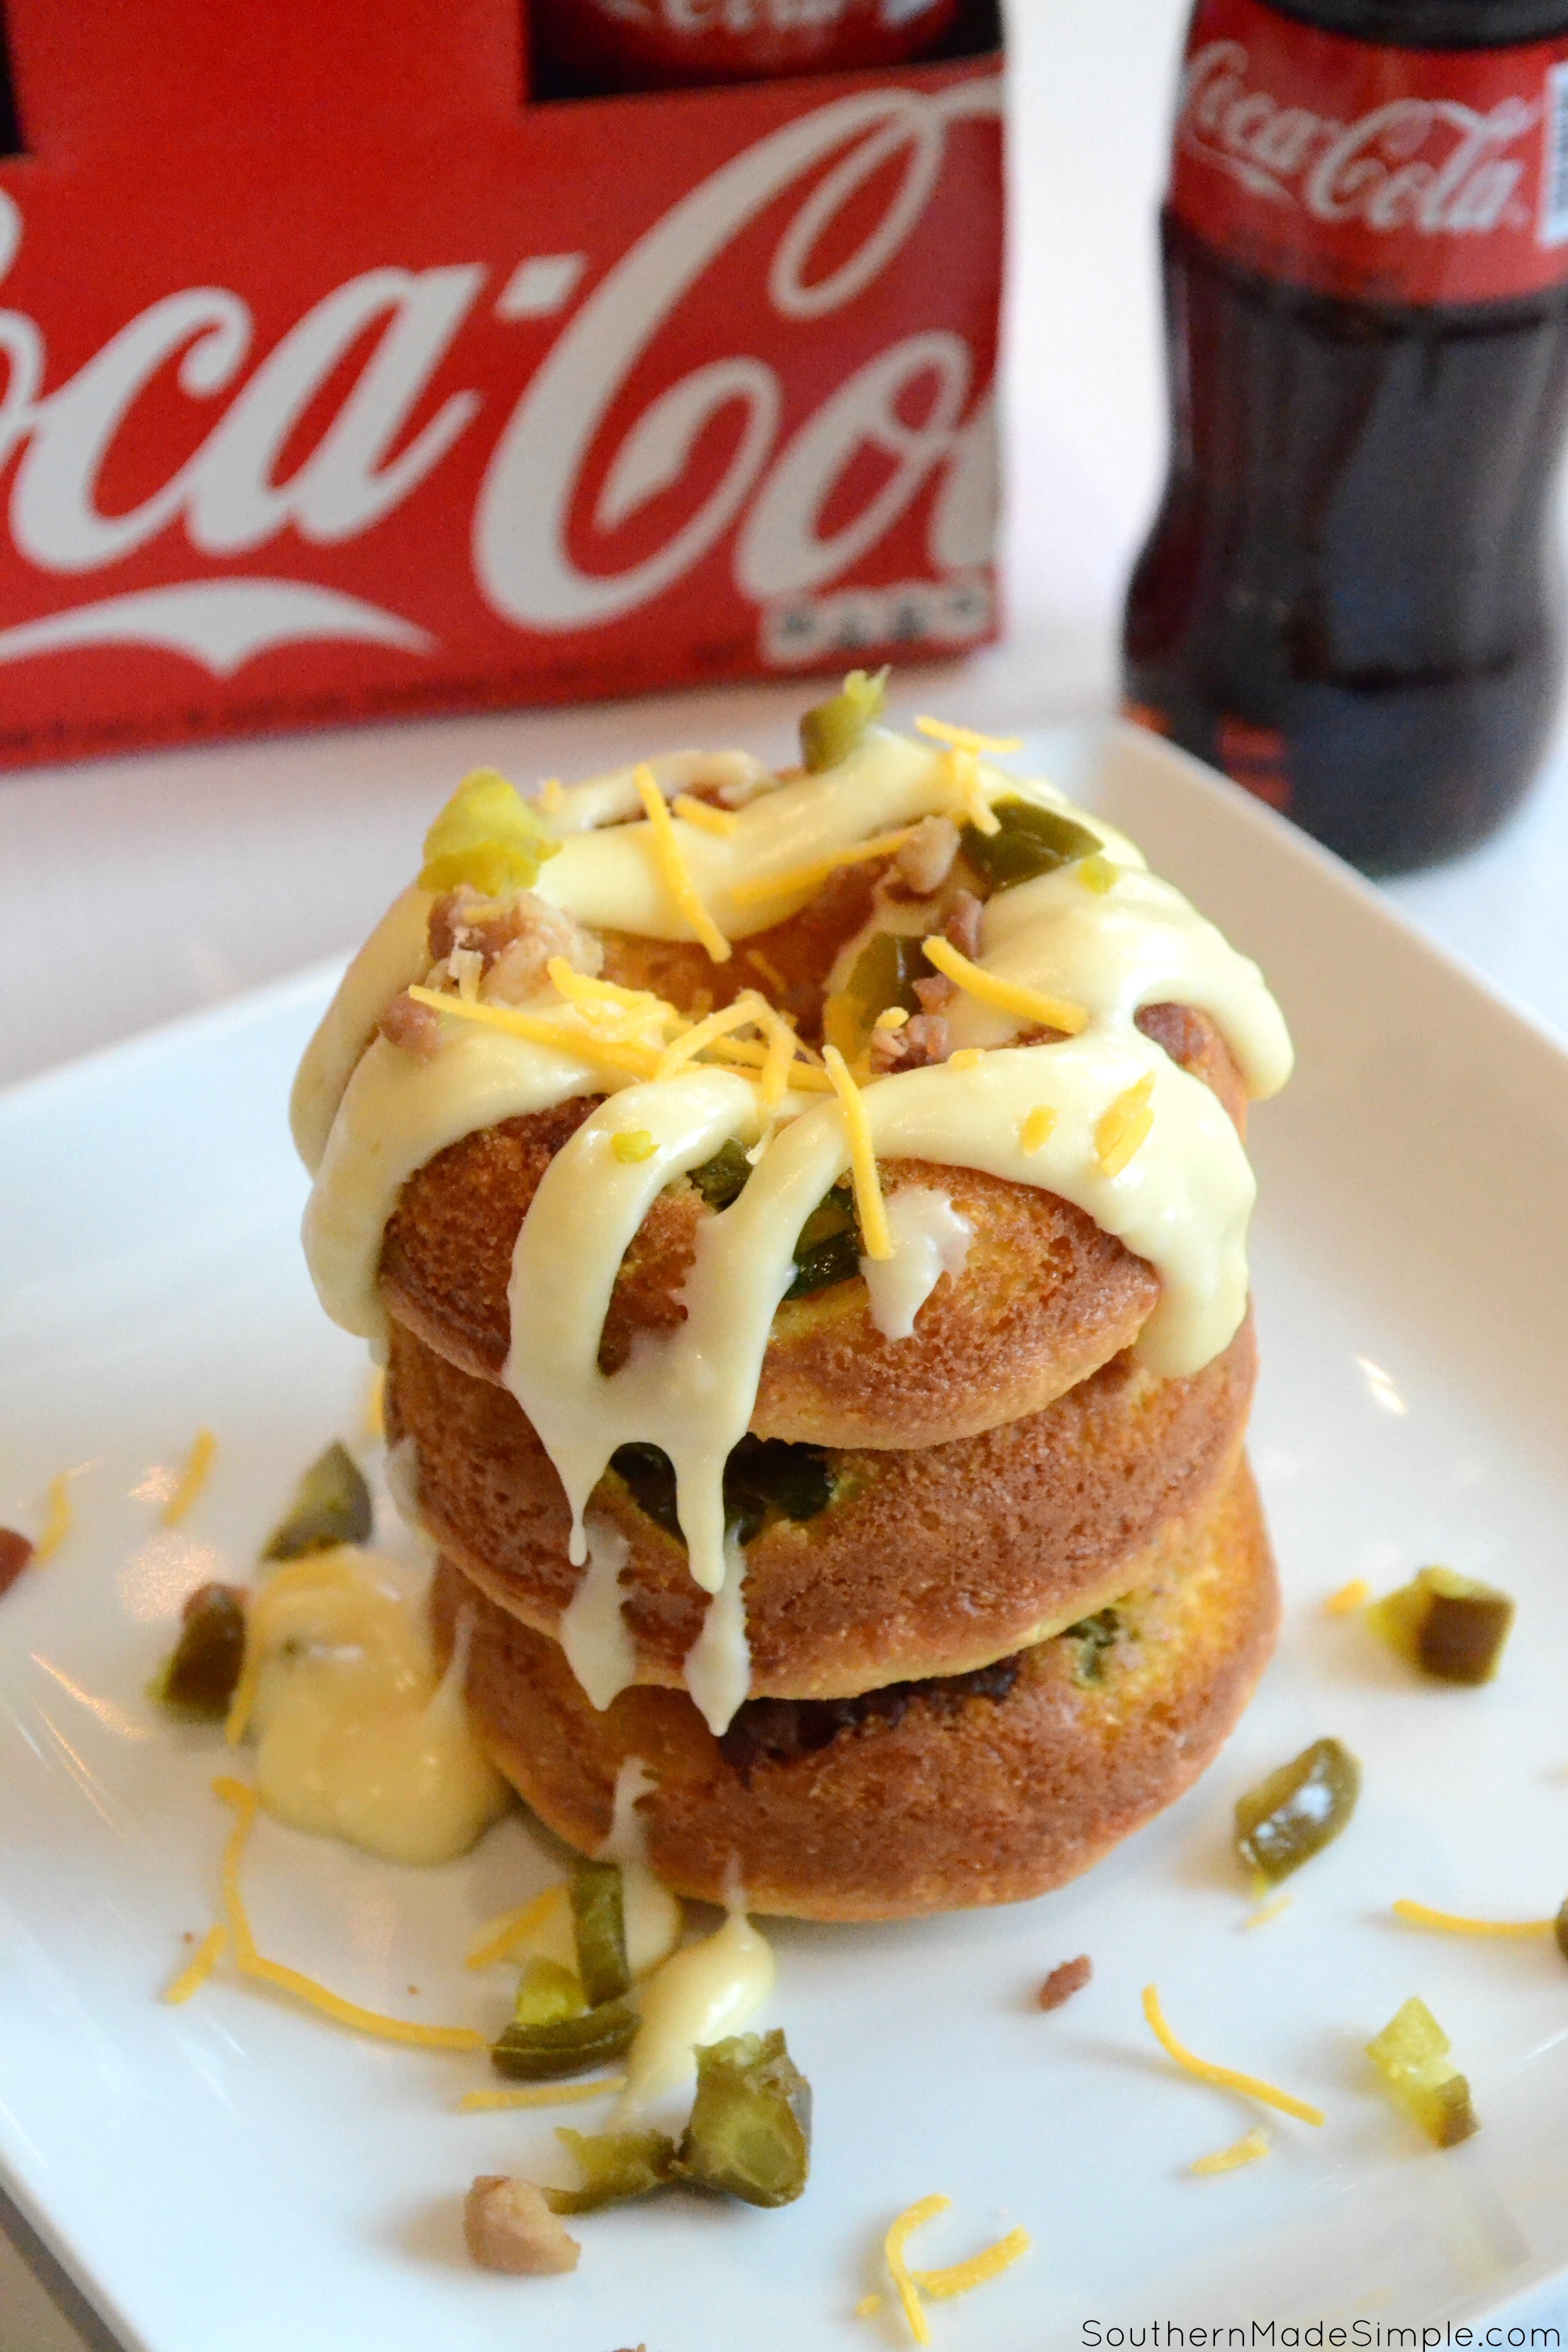 Serve up some spicy goodness during the big game with these savory Cheddar Bacon Jalapeno Doughnuts! They're a cheesy cornbread base with a spicy jalapeno cheese sauce that is in a league of it's own! Pair it with an ice cold Coca-Cola and you've got a winning hand! #ServeWithACoke #BowlGames #CollectiveBias